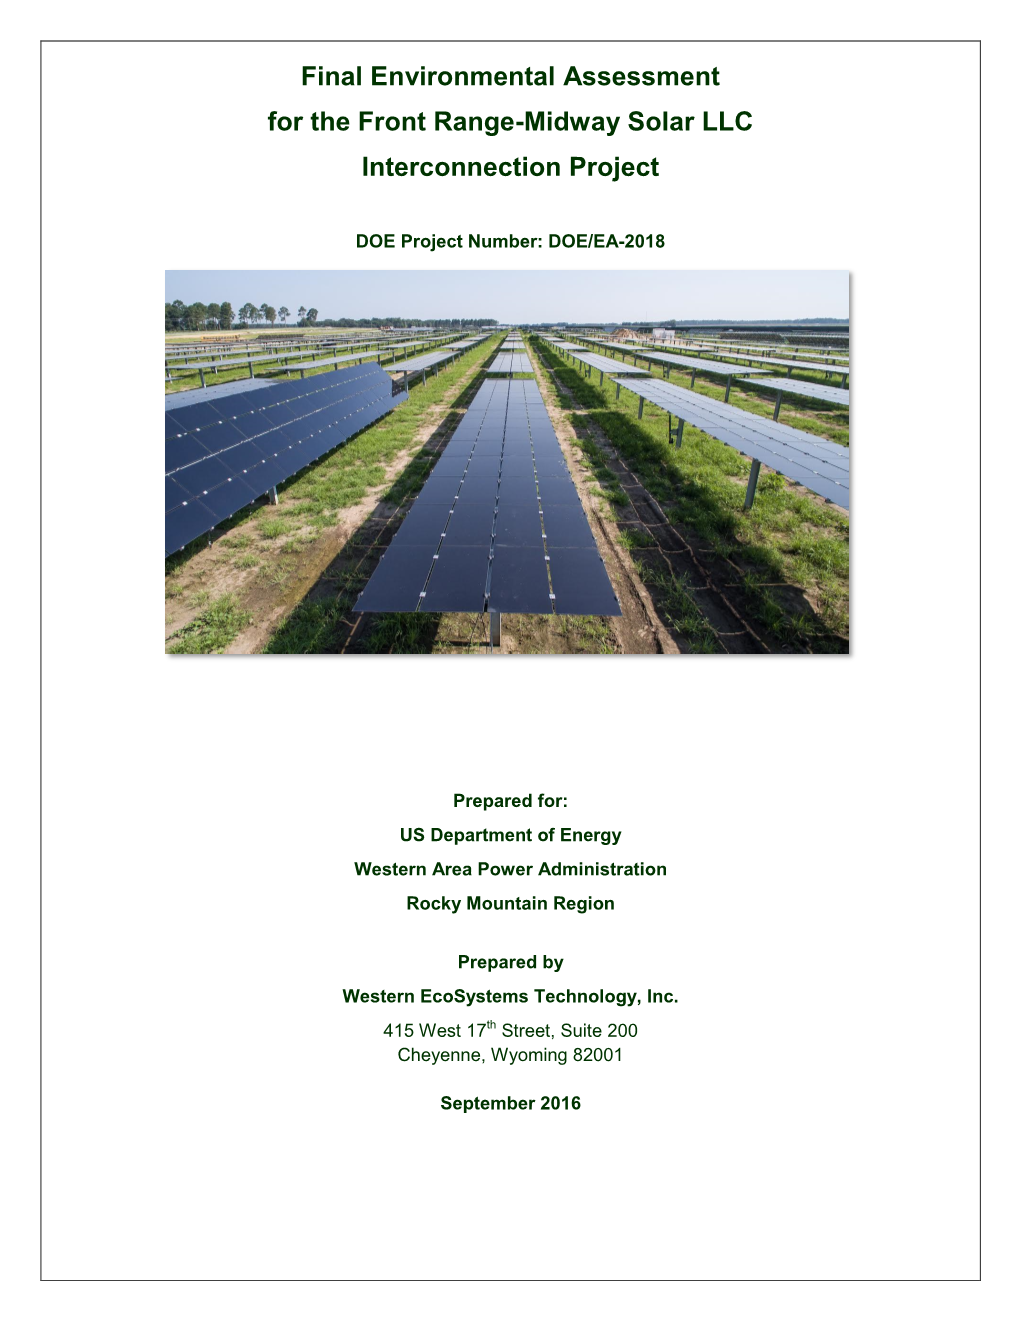 Final Environmental Assessment for the Front Range-Midway Solar LLC Interconnection Project